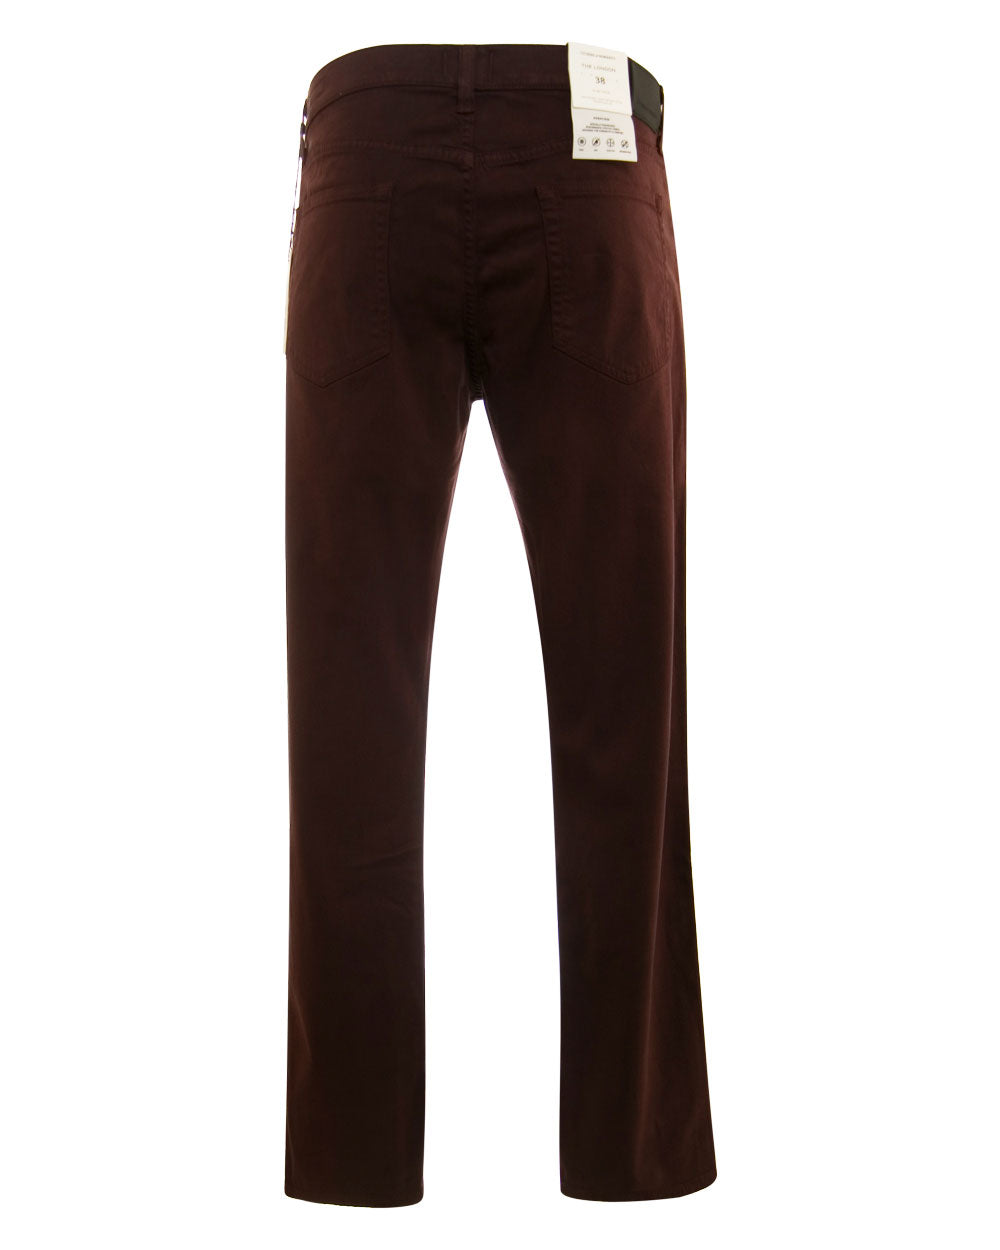 The London Twill Pant in Plum